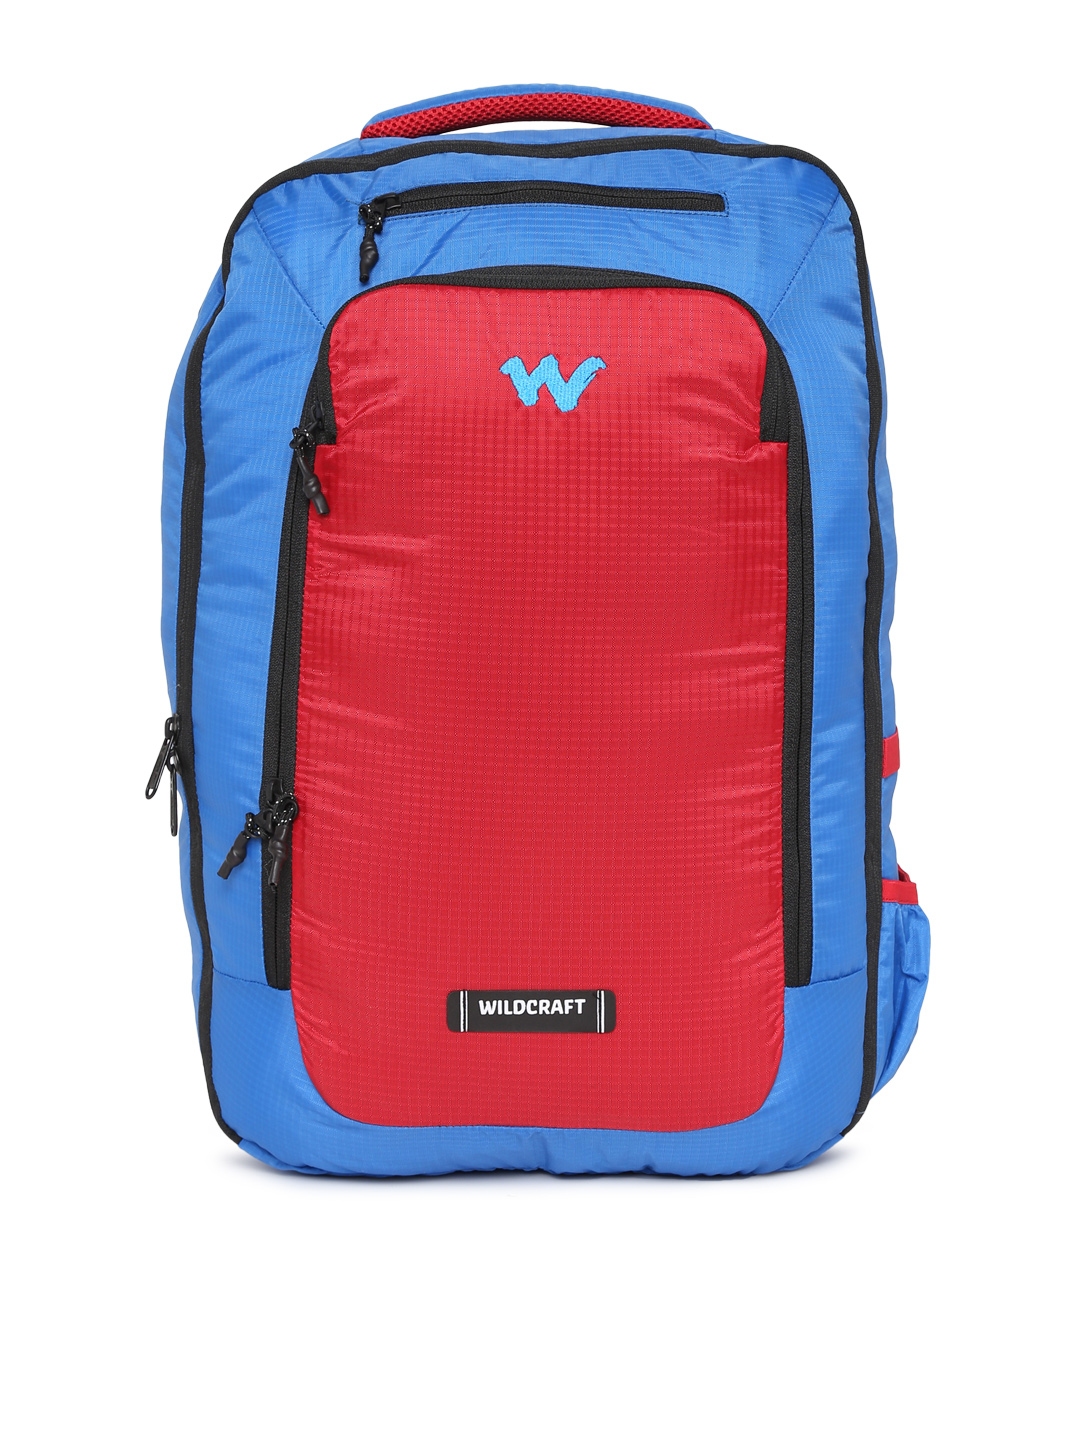 Buy Wildcraft 295 Ltrs Pack 3 Play Off Blue Casual Backpack  12251PlayOffBlueHxWxD  185x13x75inches at Amazonin